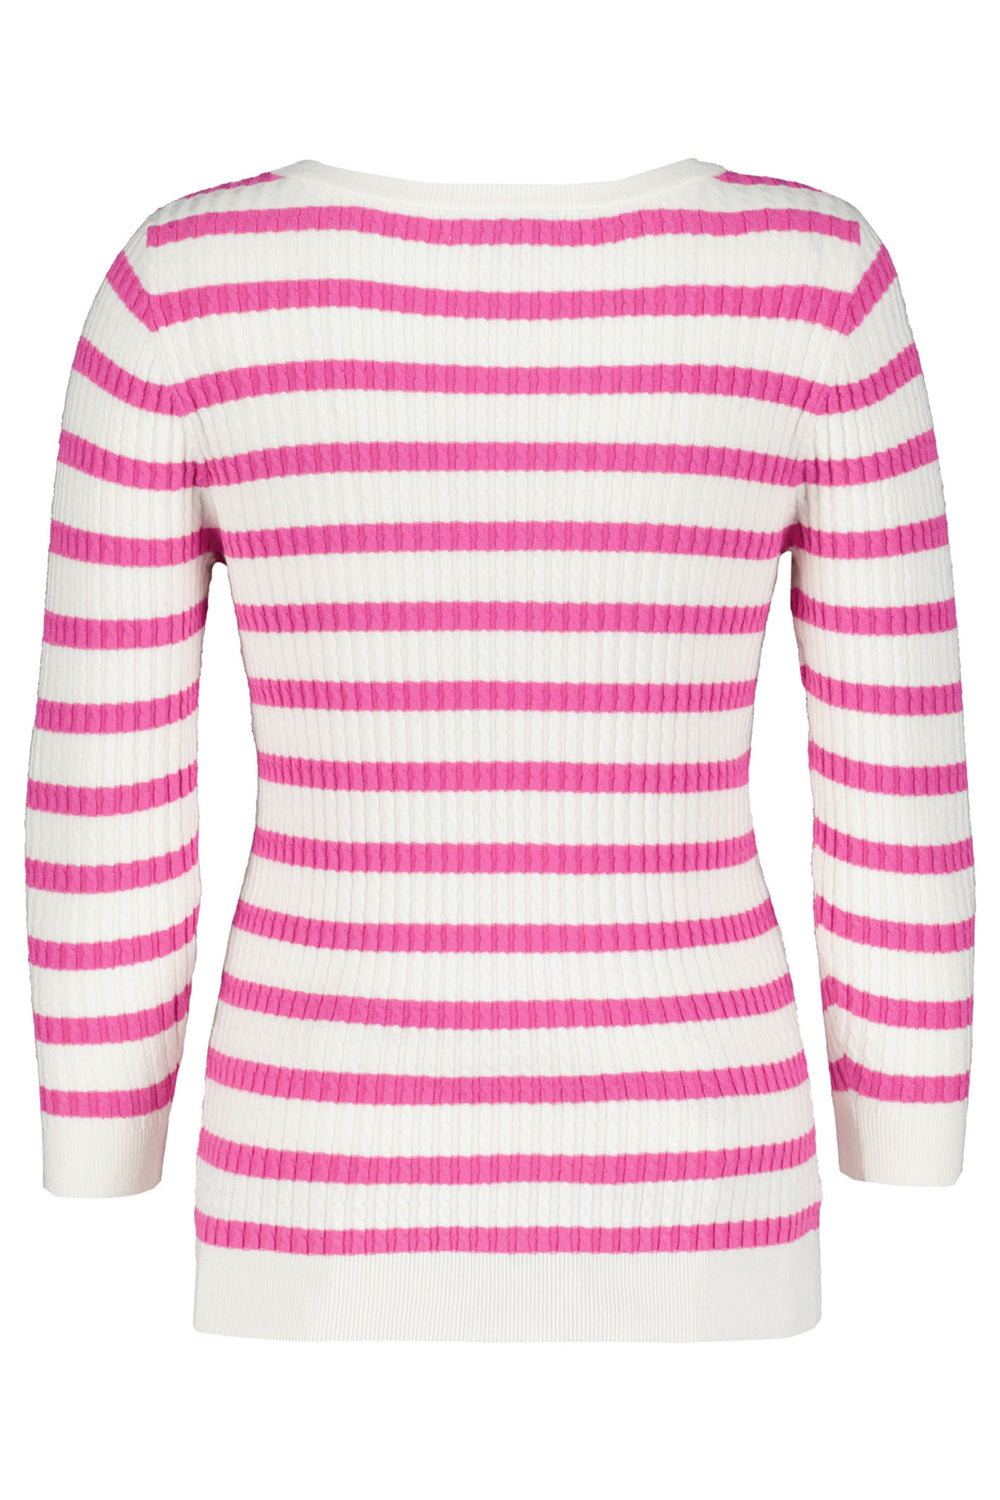 Red Button SRB4195 Cyclaam Pink Stripe Long Sleeve Cable Knit Top - Dotique